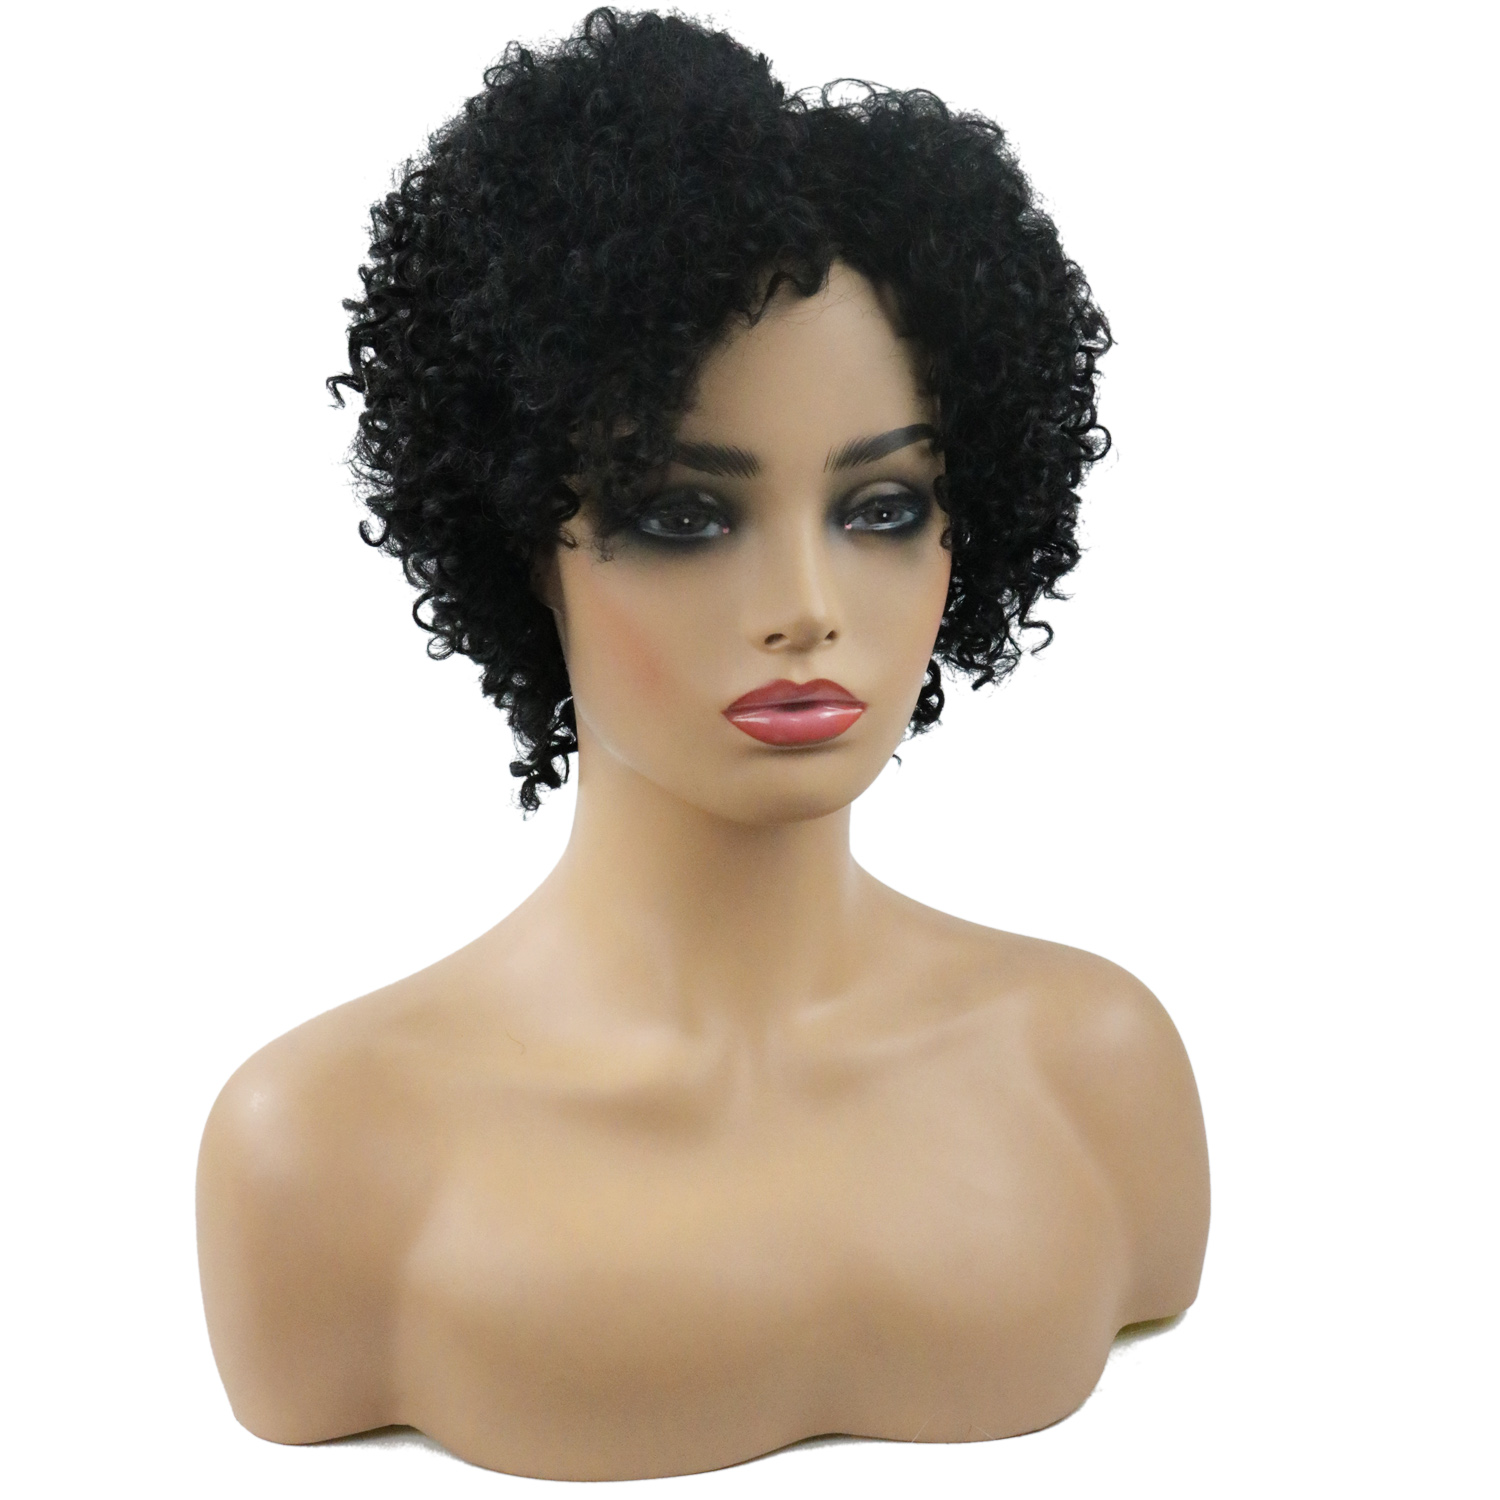 Ericdress Medium Kinky Curly Synthetic Hair African American Wig